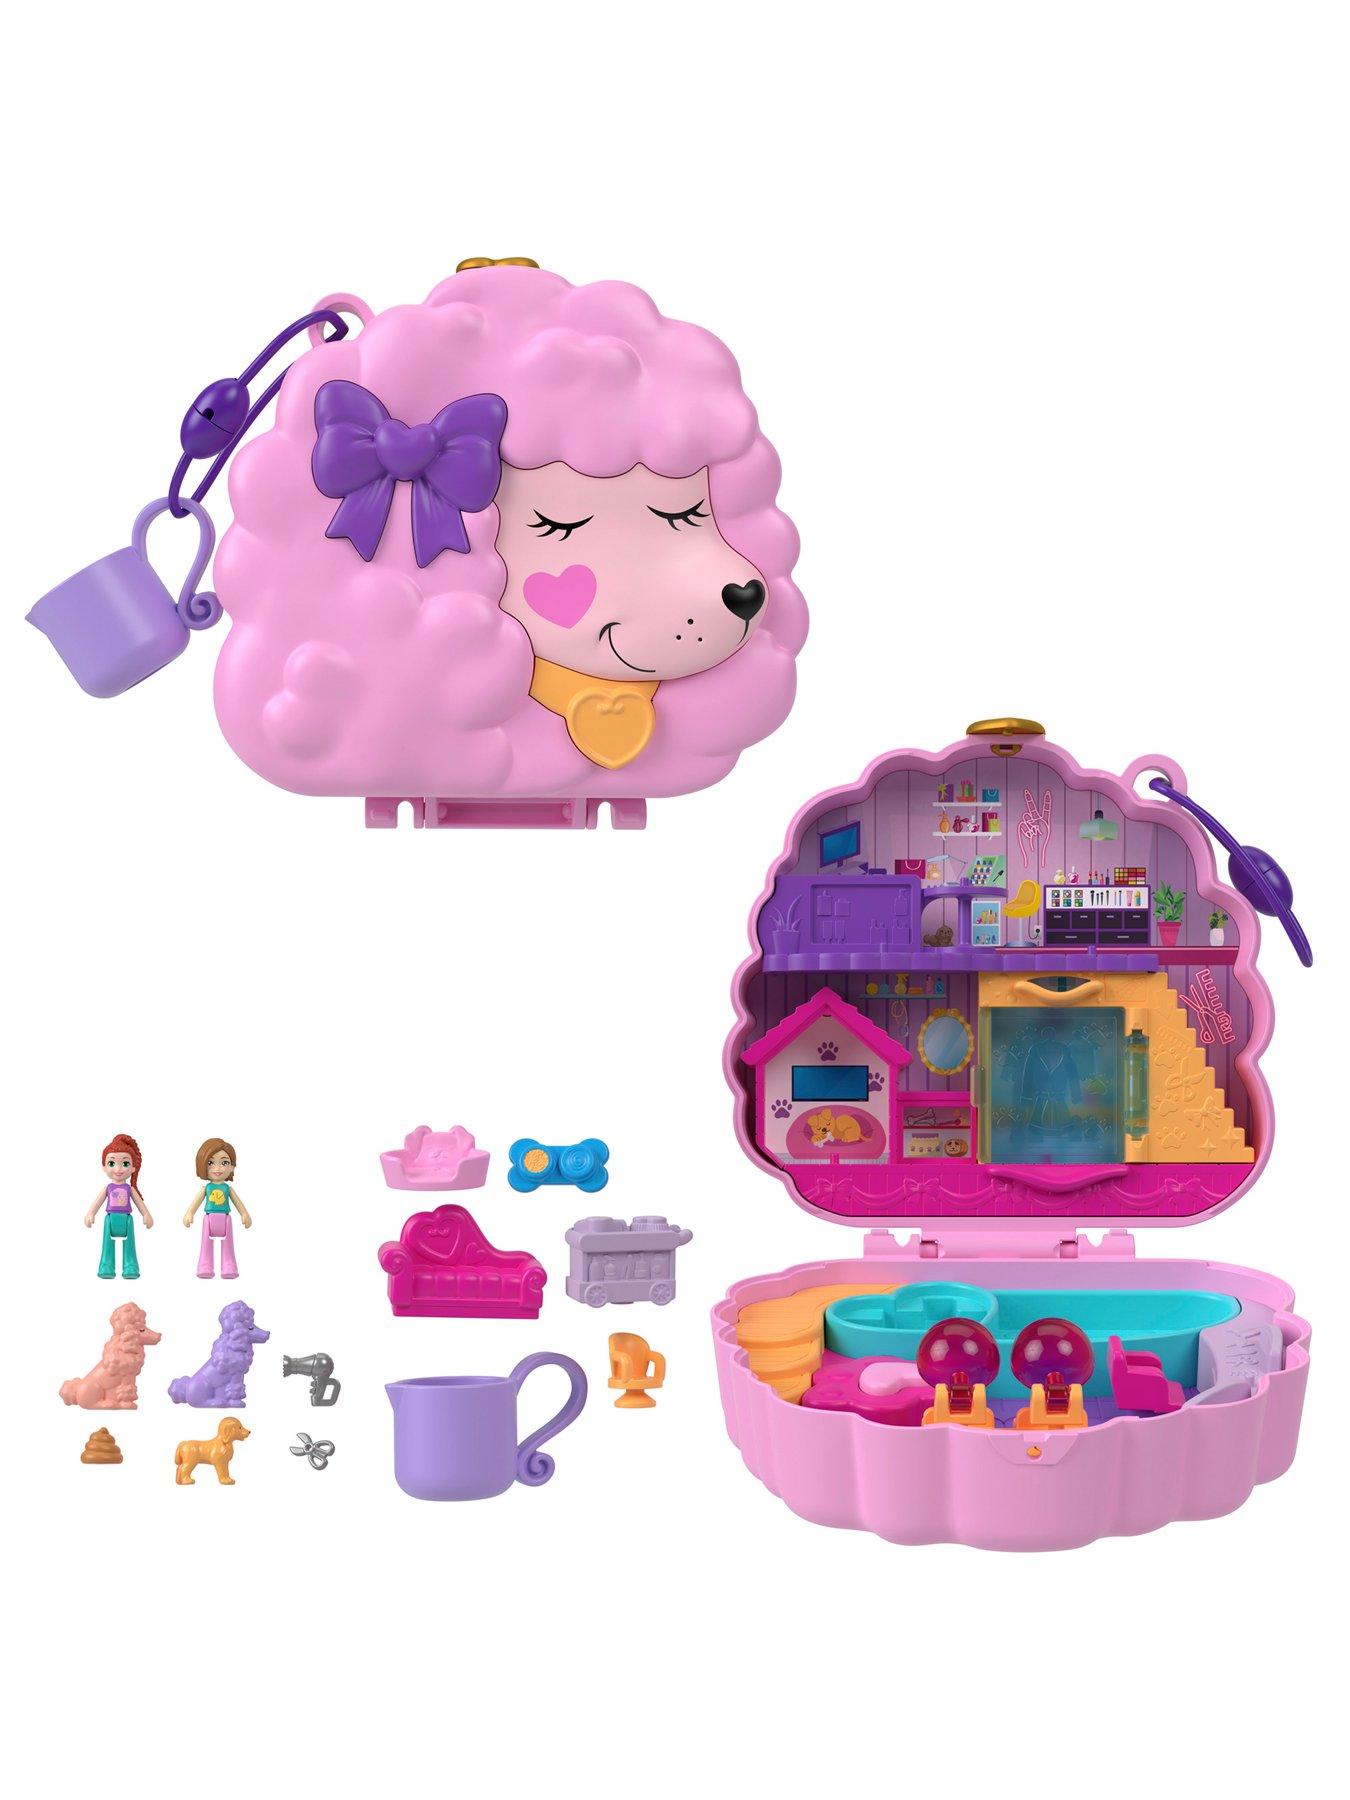 So happy to get my hands on this Friends Polly Pocket collector